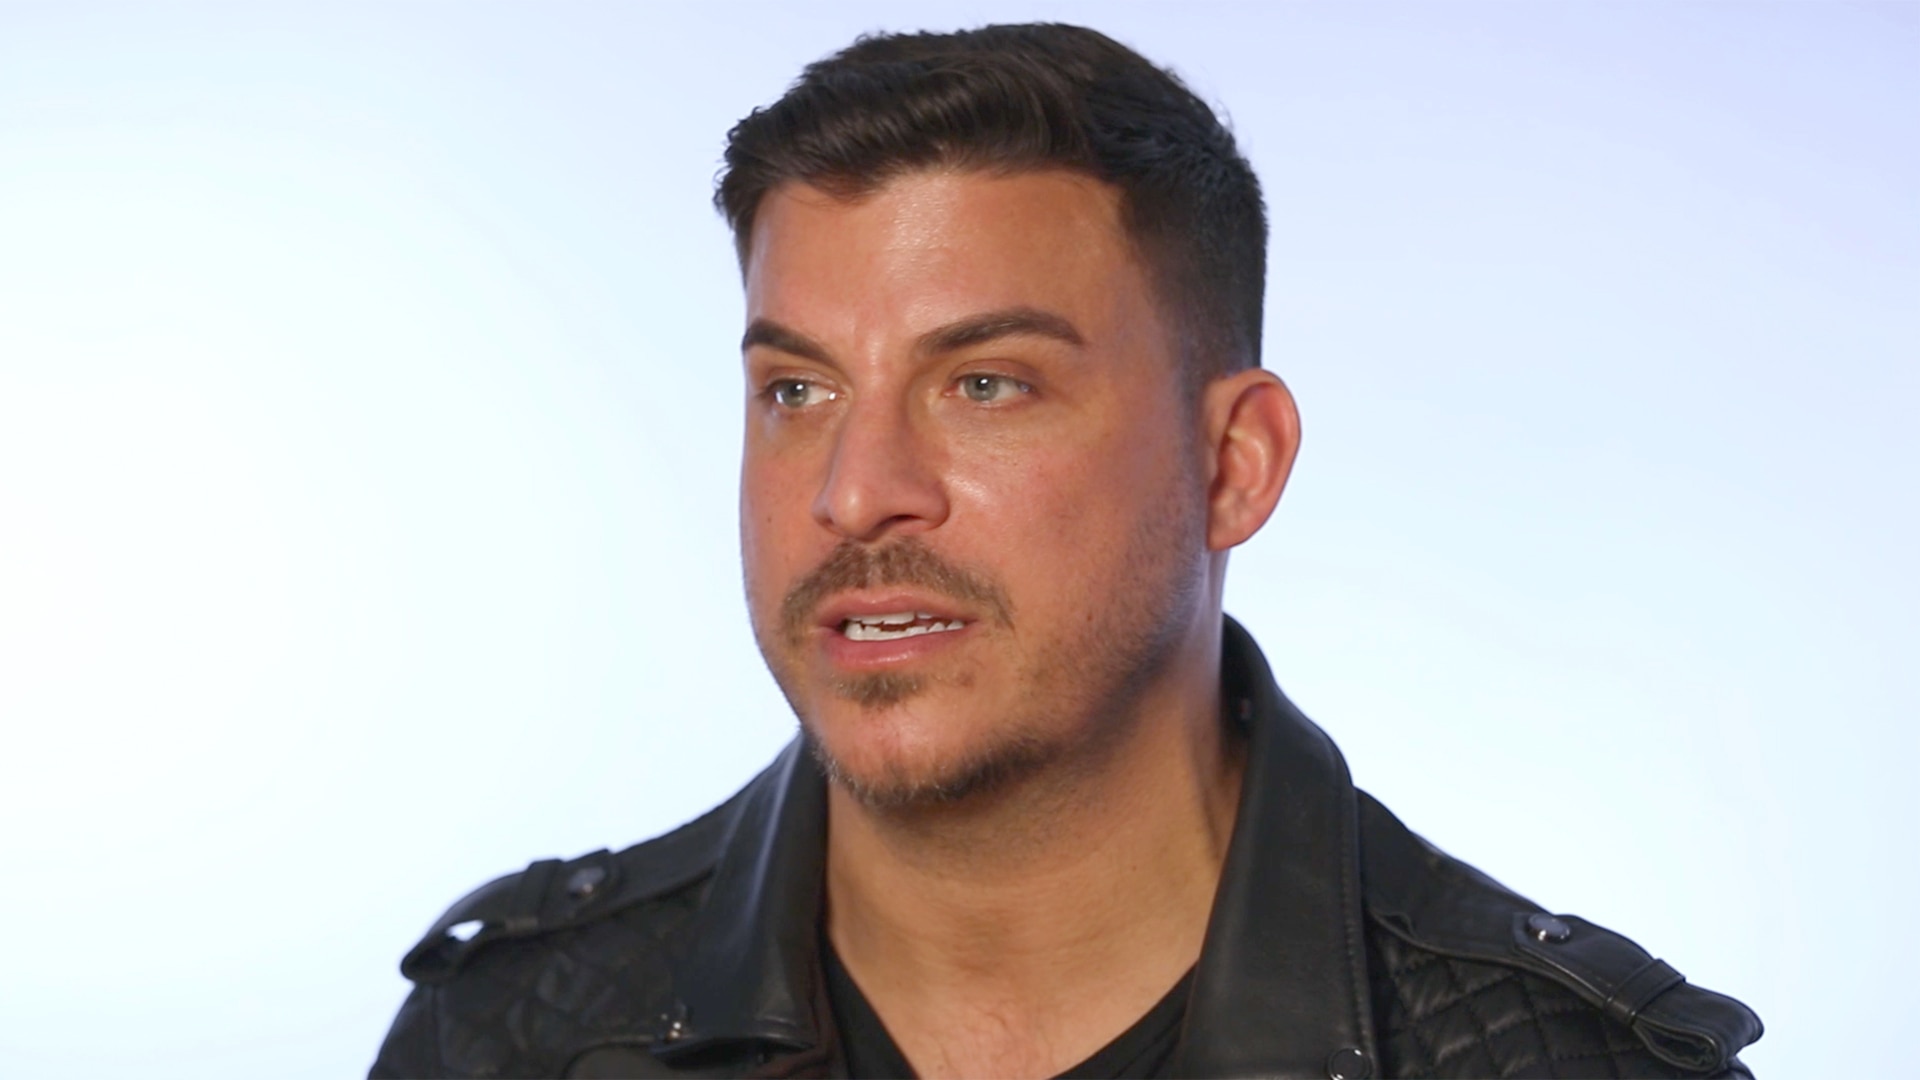 Is Jax Taylor Ready for Kids?